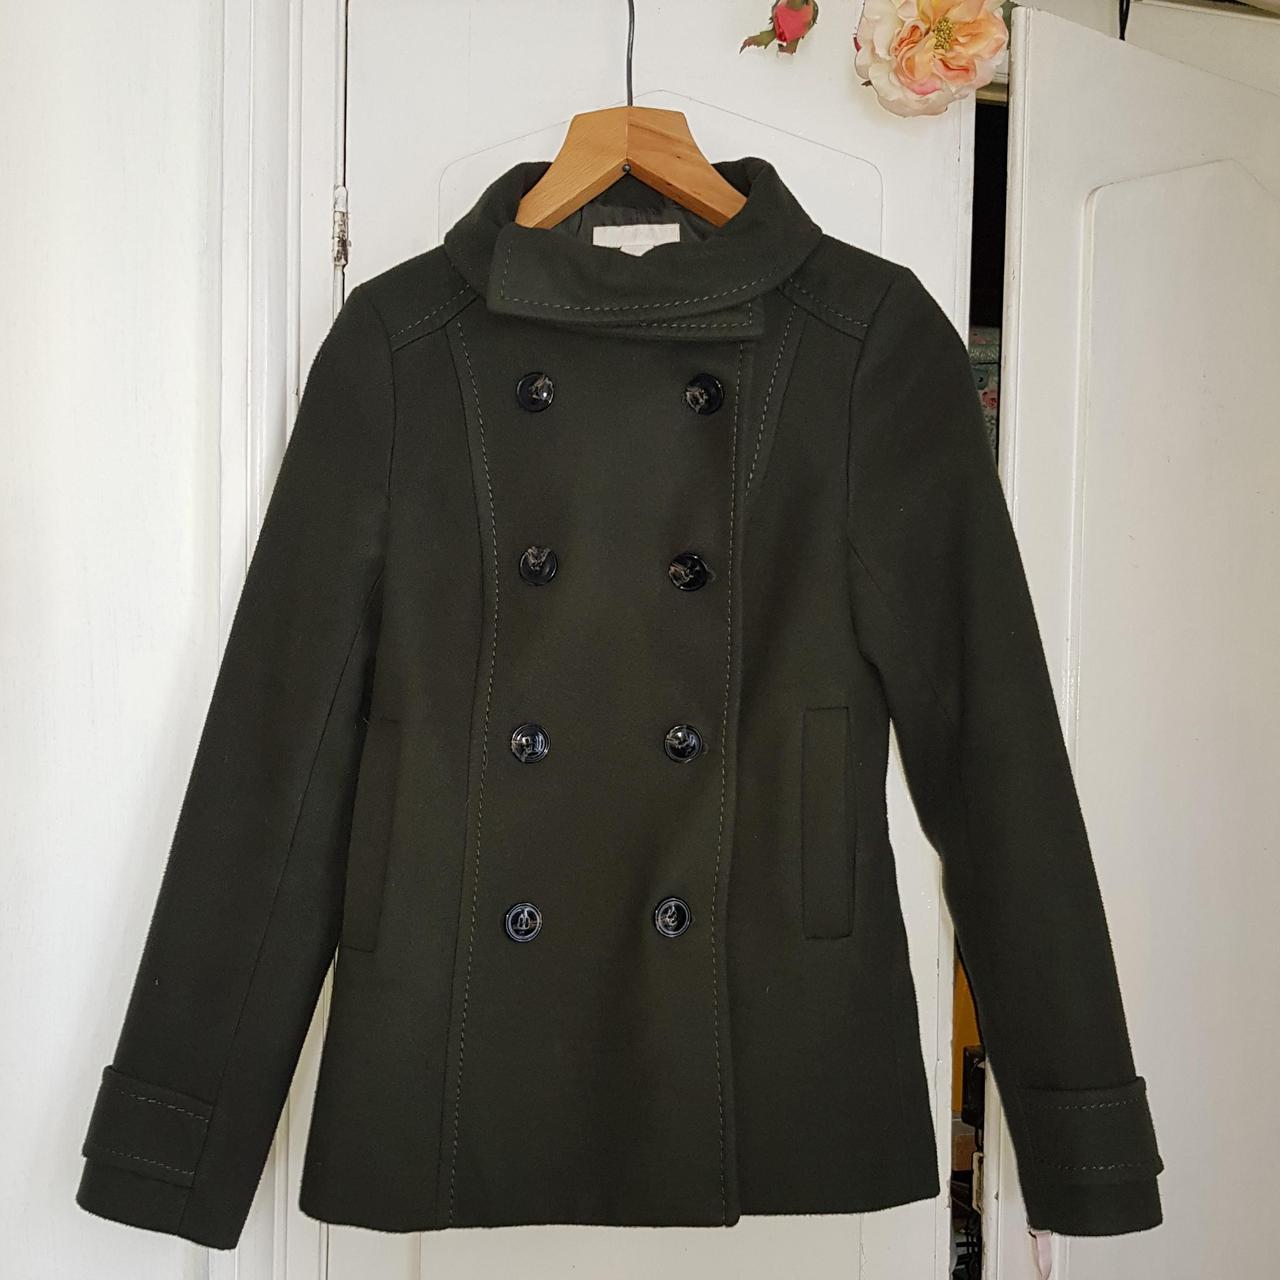 Lovely dark green pea coat. Double breasted with two... - Depop